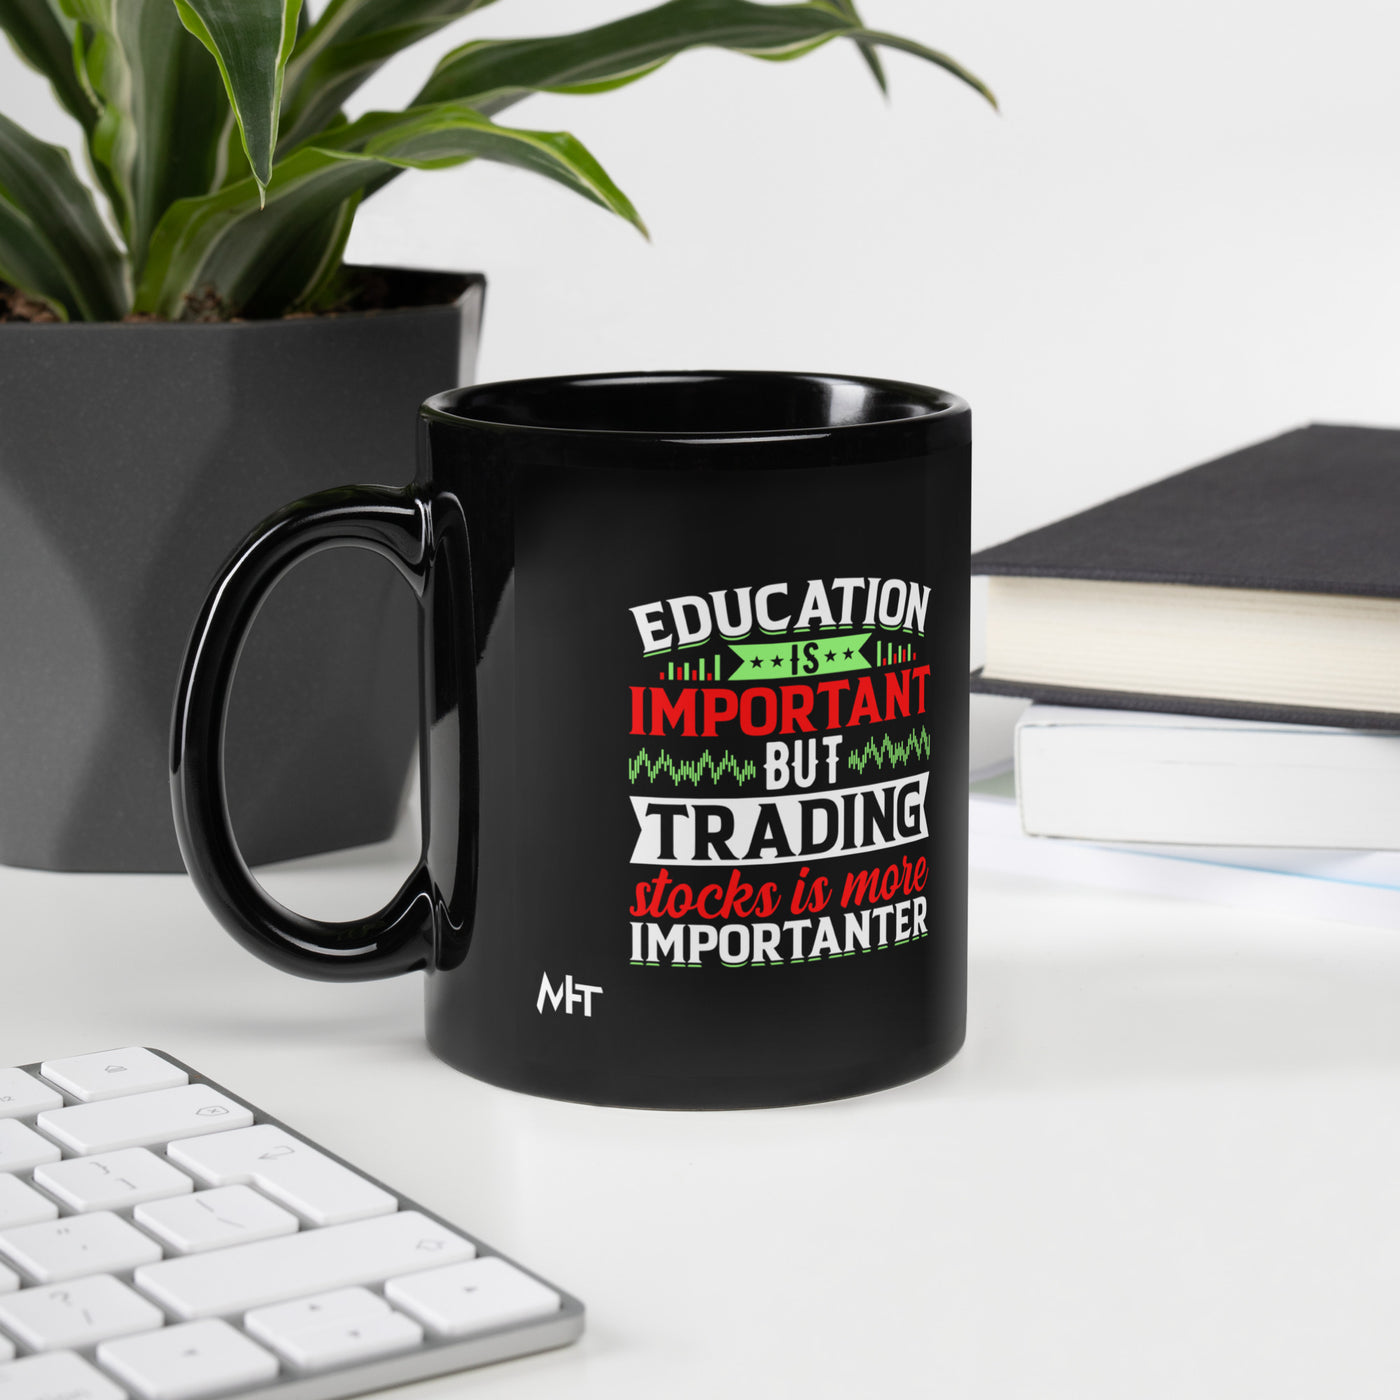 Education is important but trading stocks is more importanter - Black Glossy Mug